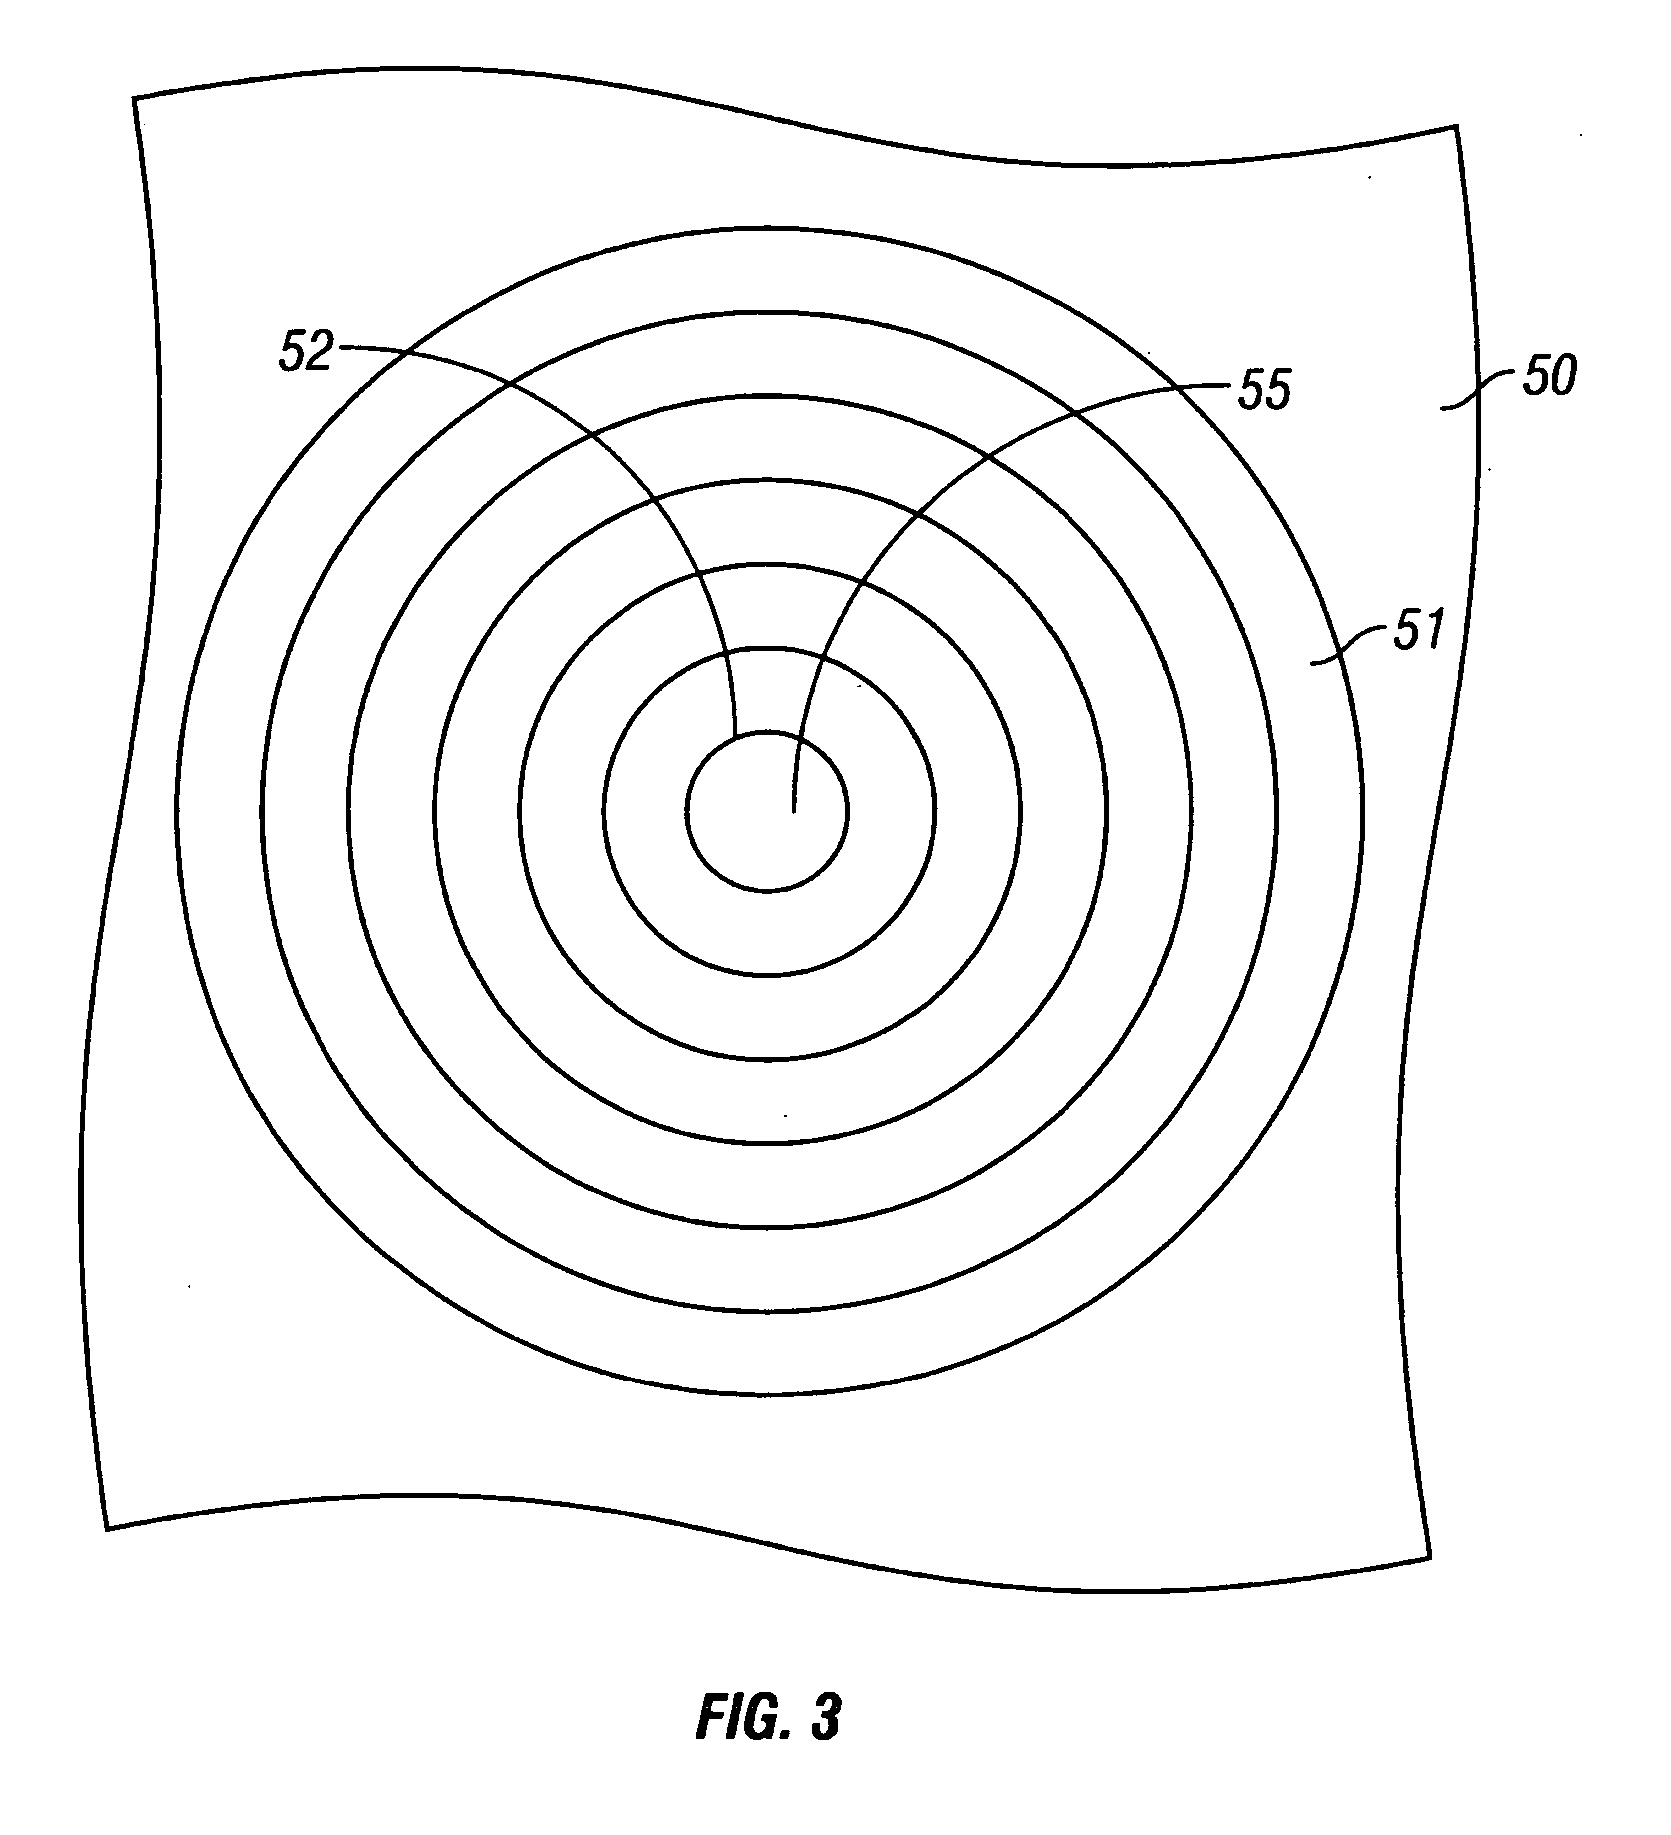 System and method for patterning a master disk for nanoimprinting patterned magnetic recording disks